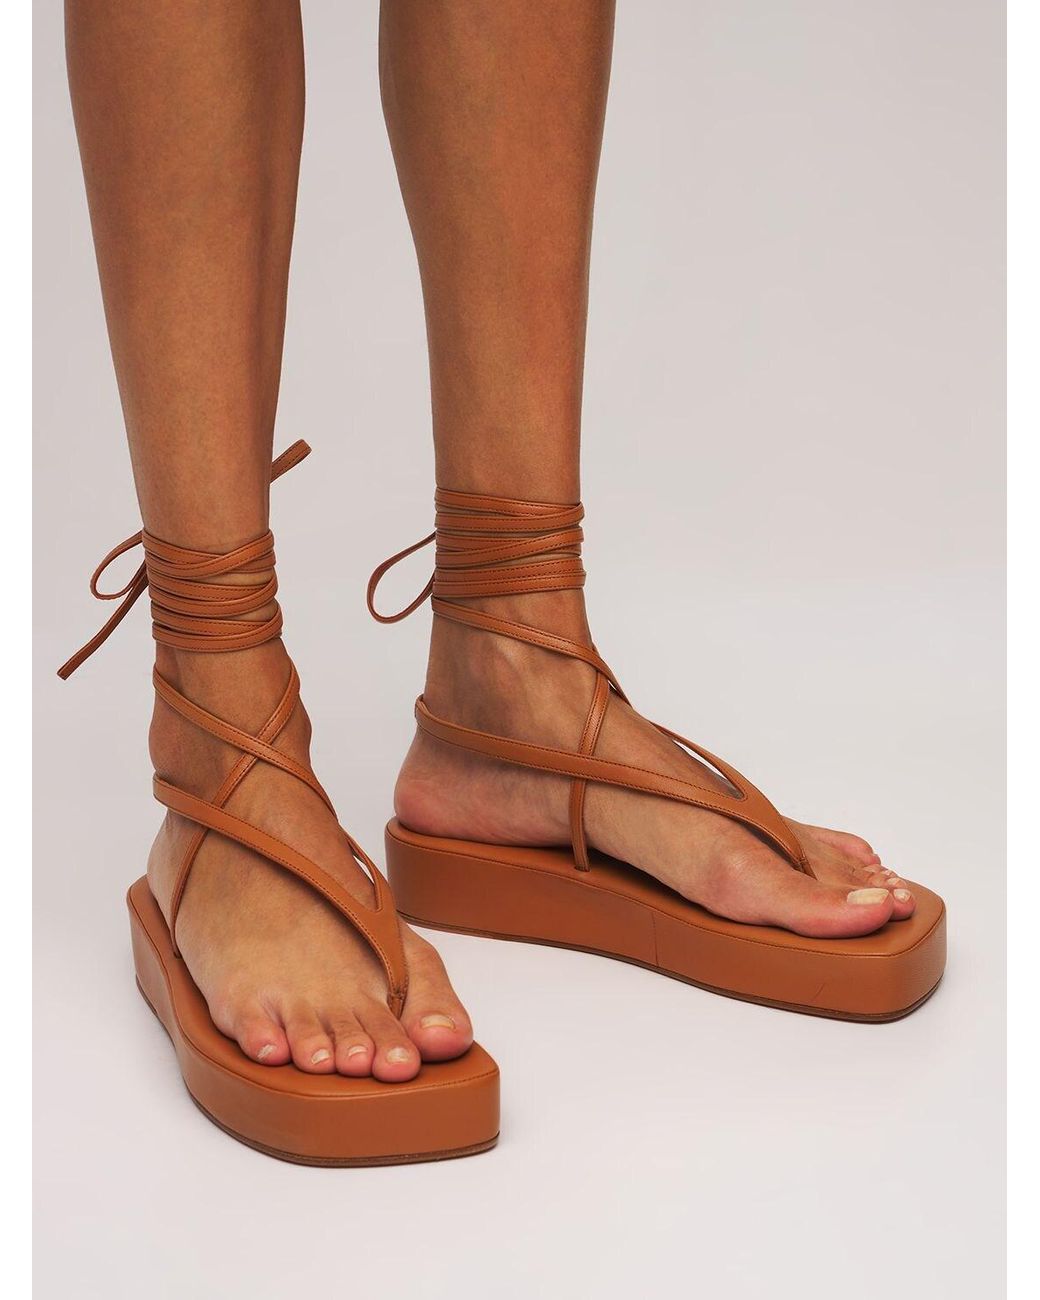 AMINA MUADDI 35mm Jamie Leather Thong Sandals in Tan (Brown) | Lyst